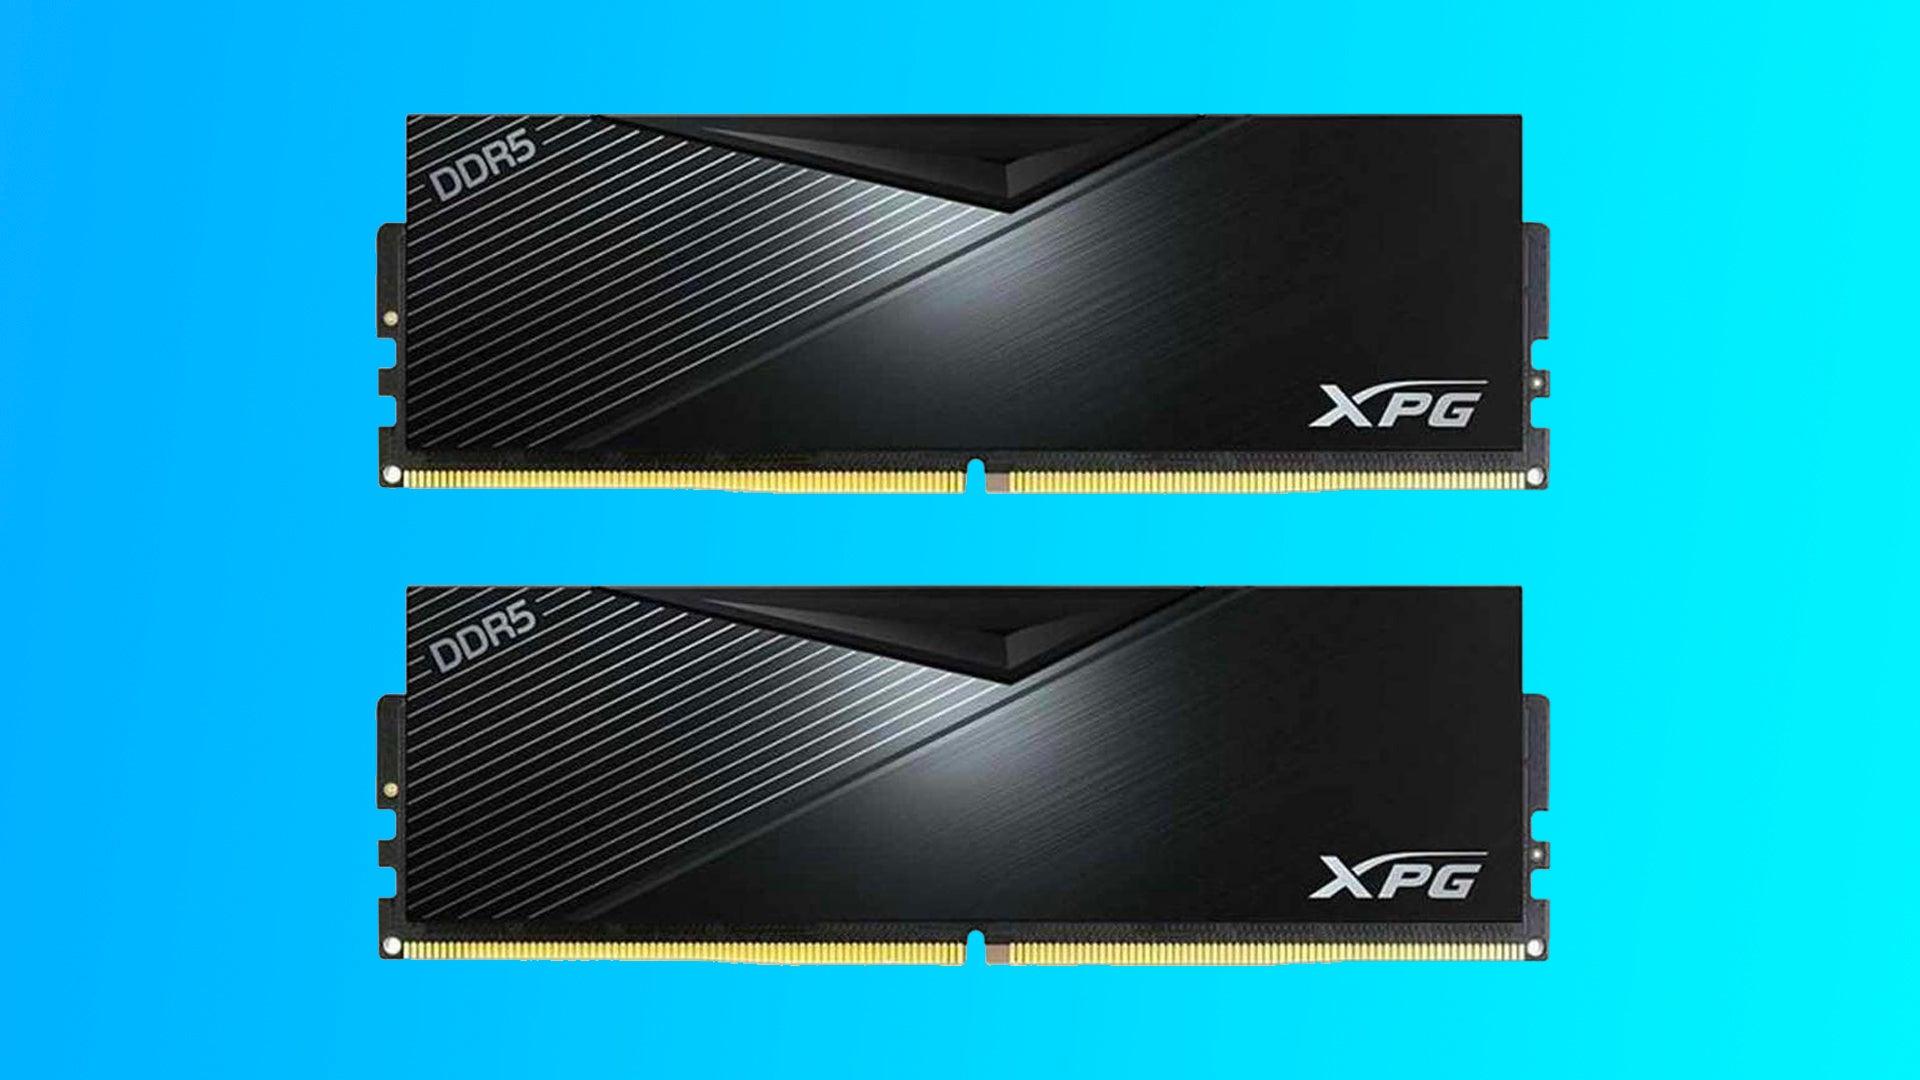 Image for Need some RAM? This ADATA XPG DDR5 32GB kit is going for £116 with this code